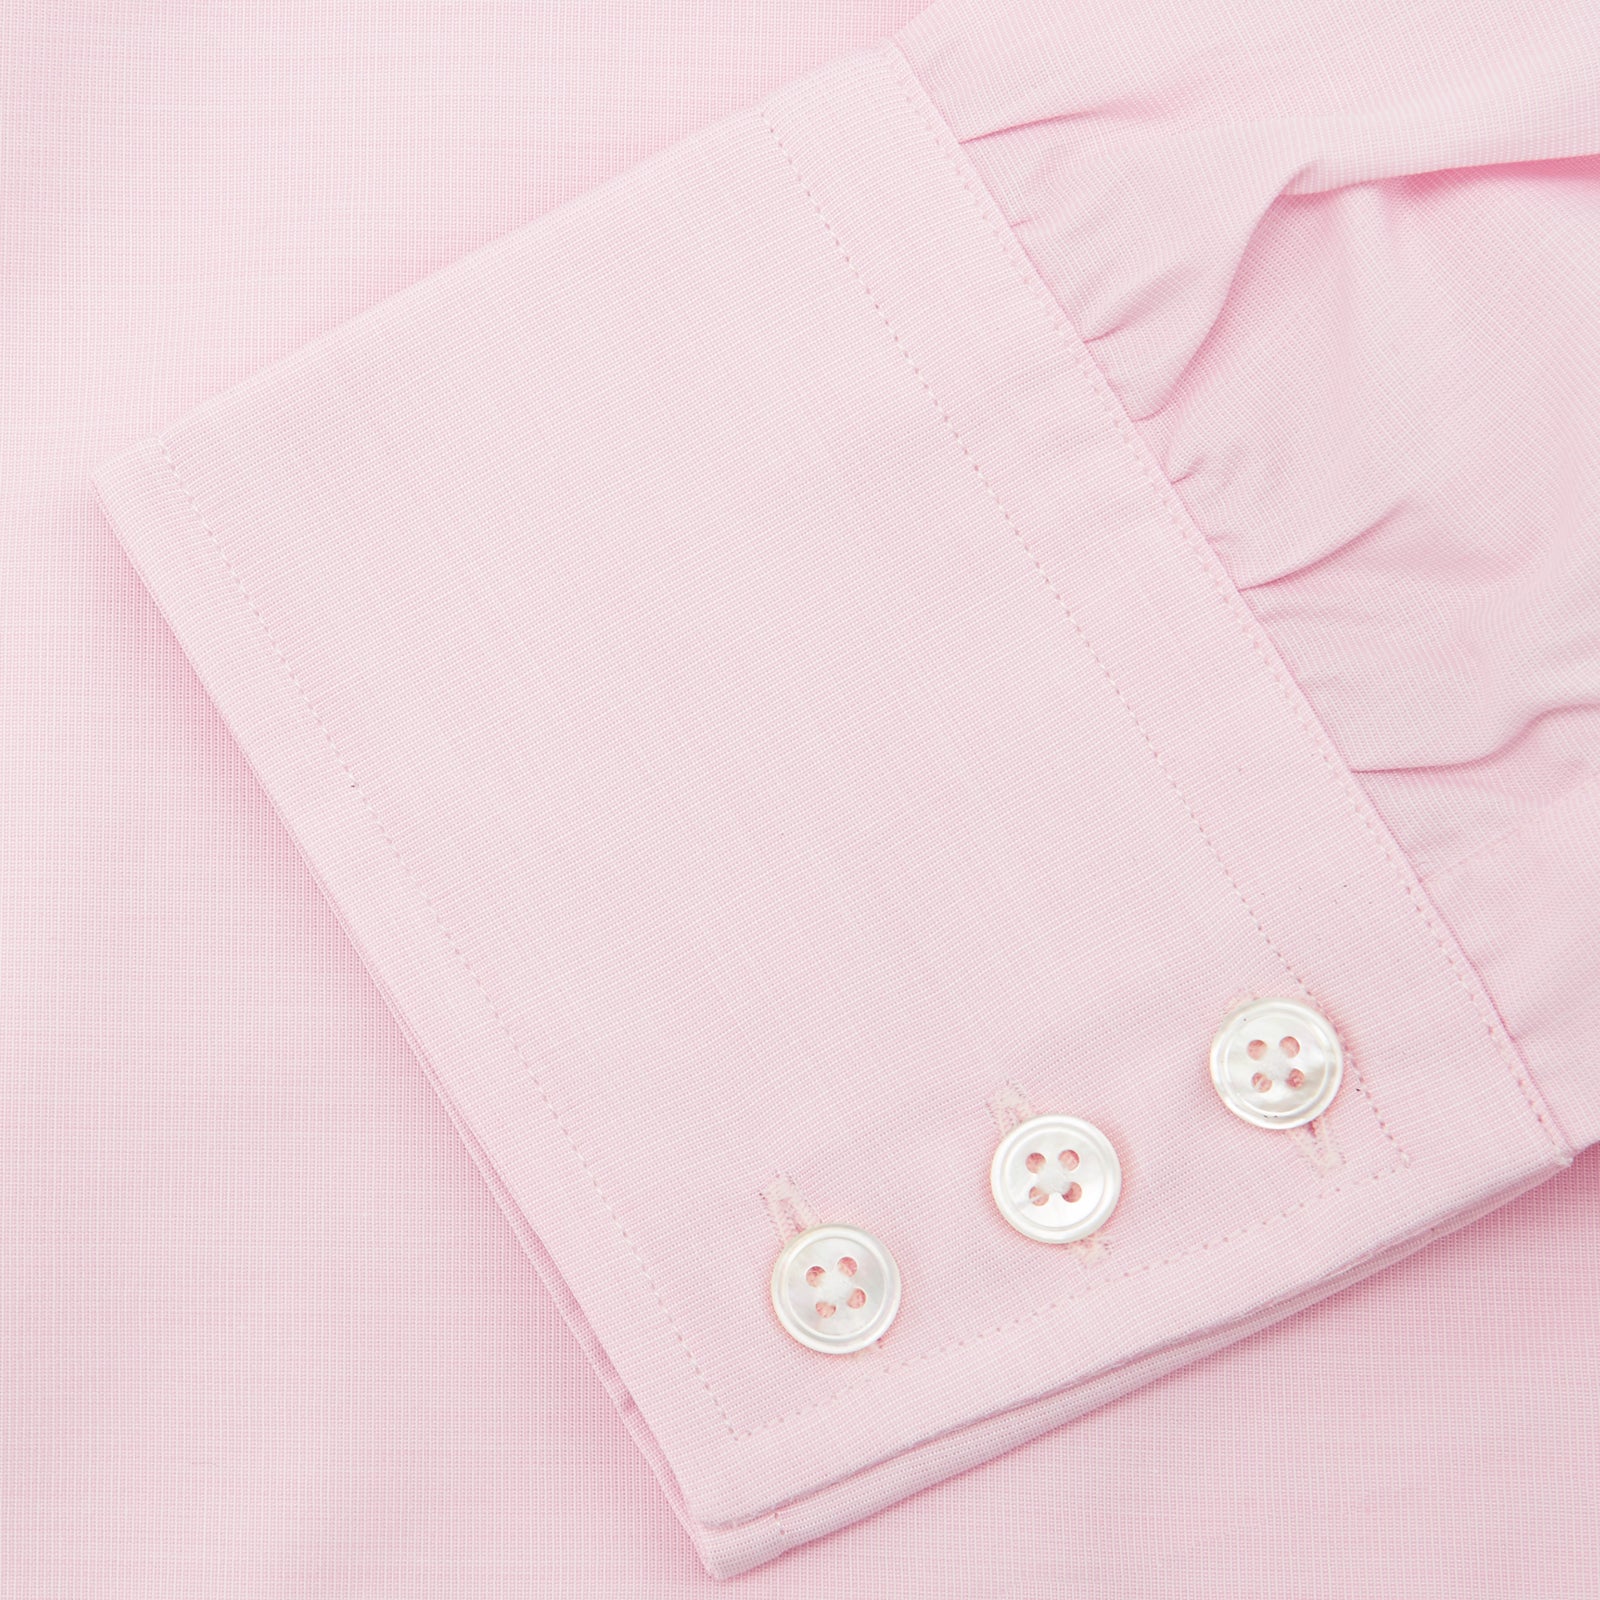 Pink End-on-End Shirt with T&A Collar and 3-Button Cuffs